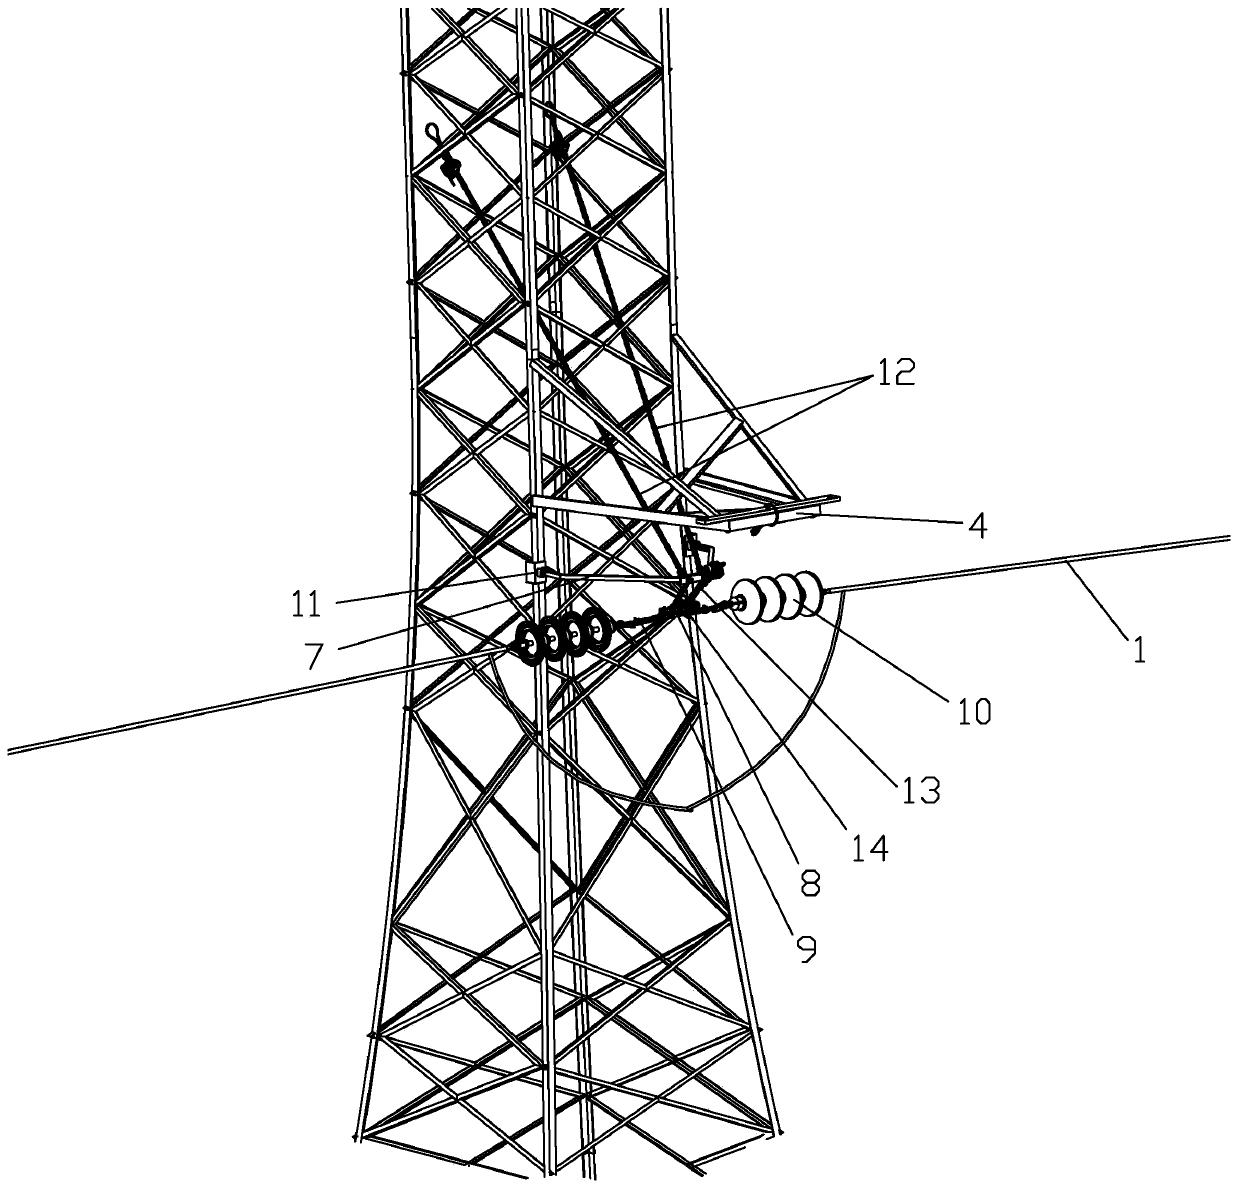 A force-bearing device for replacing the main material of the cross-arm of the tension tower of a transmission line and its use method